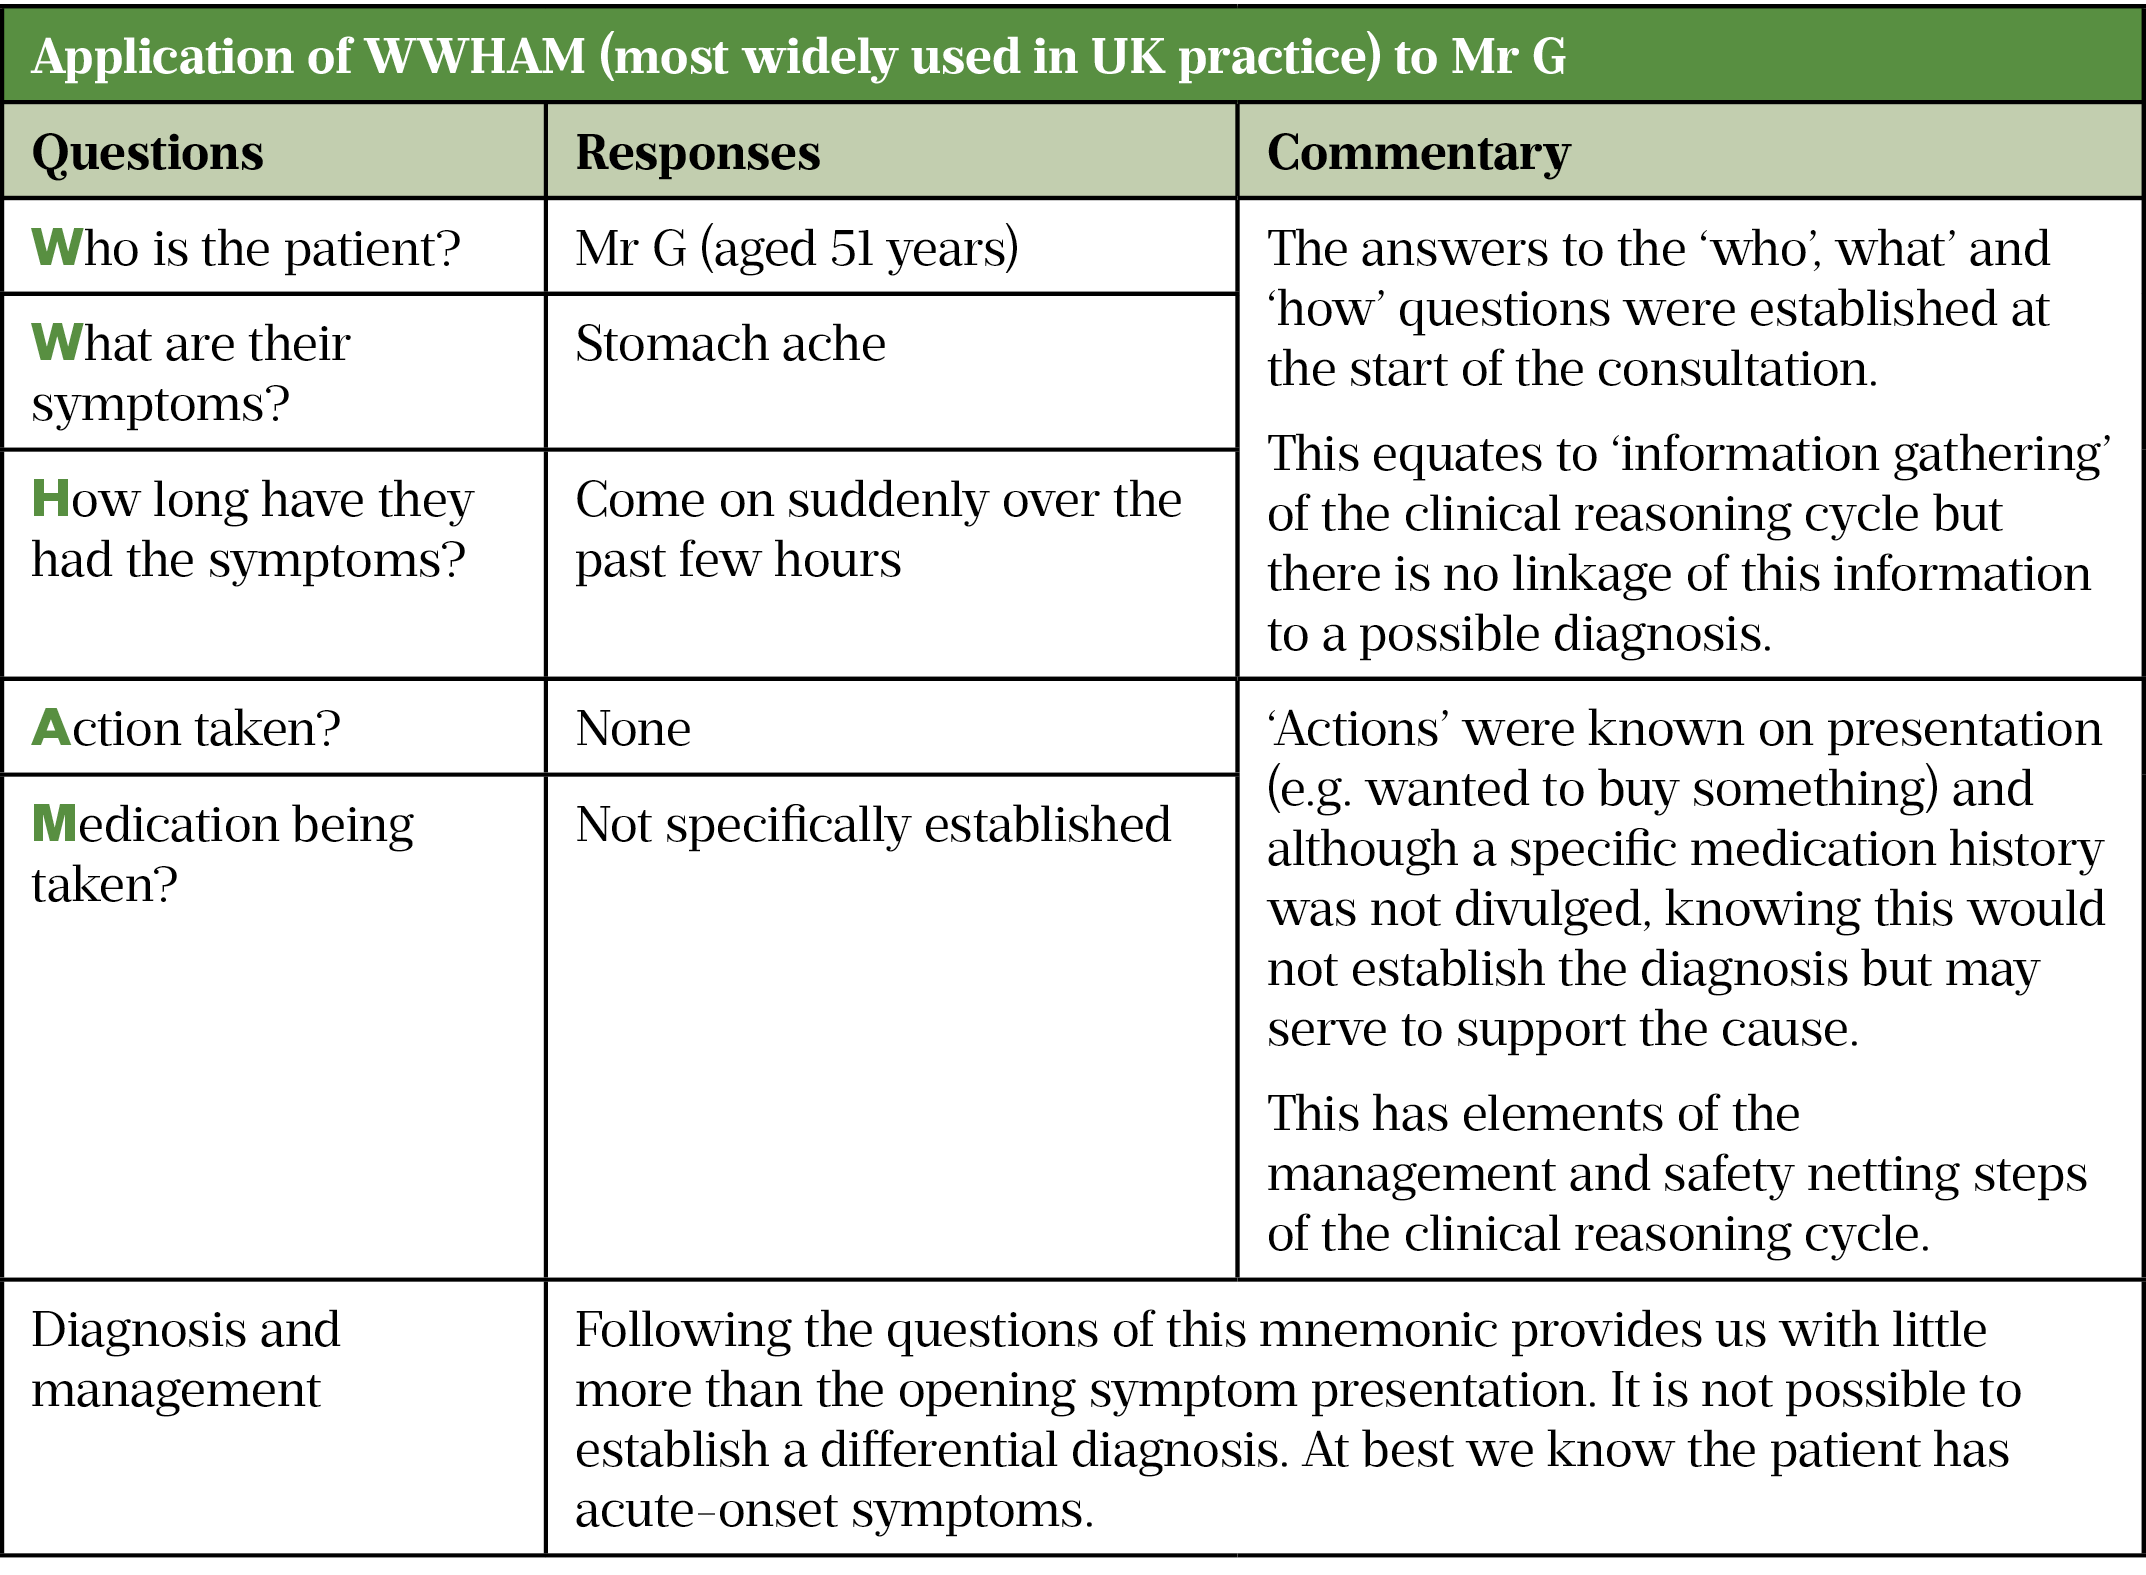 Table 2: Application of WWHAM mnemonic (most widely used in UK practice) to Mr G